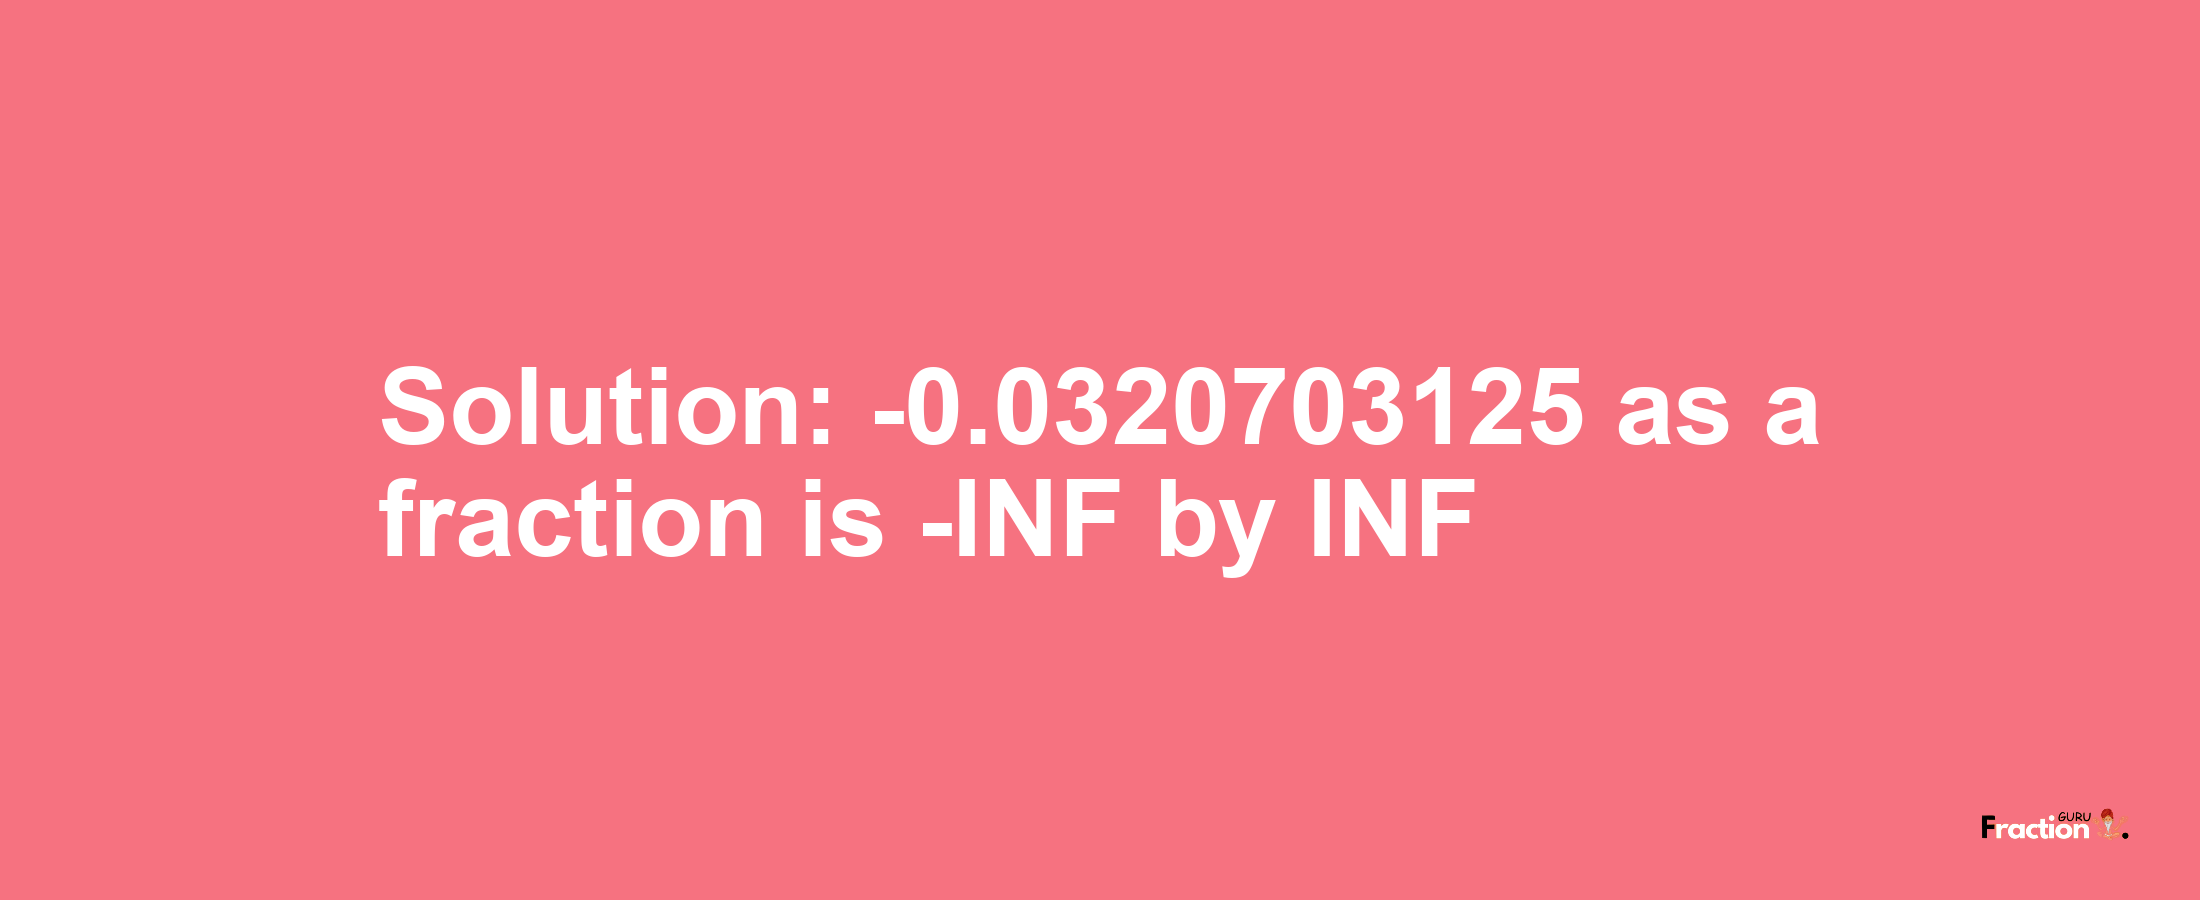 Solution:-0.0320703125 as a fraction is -INF/INF